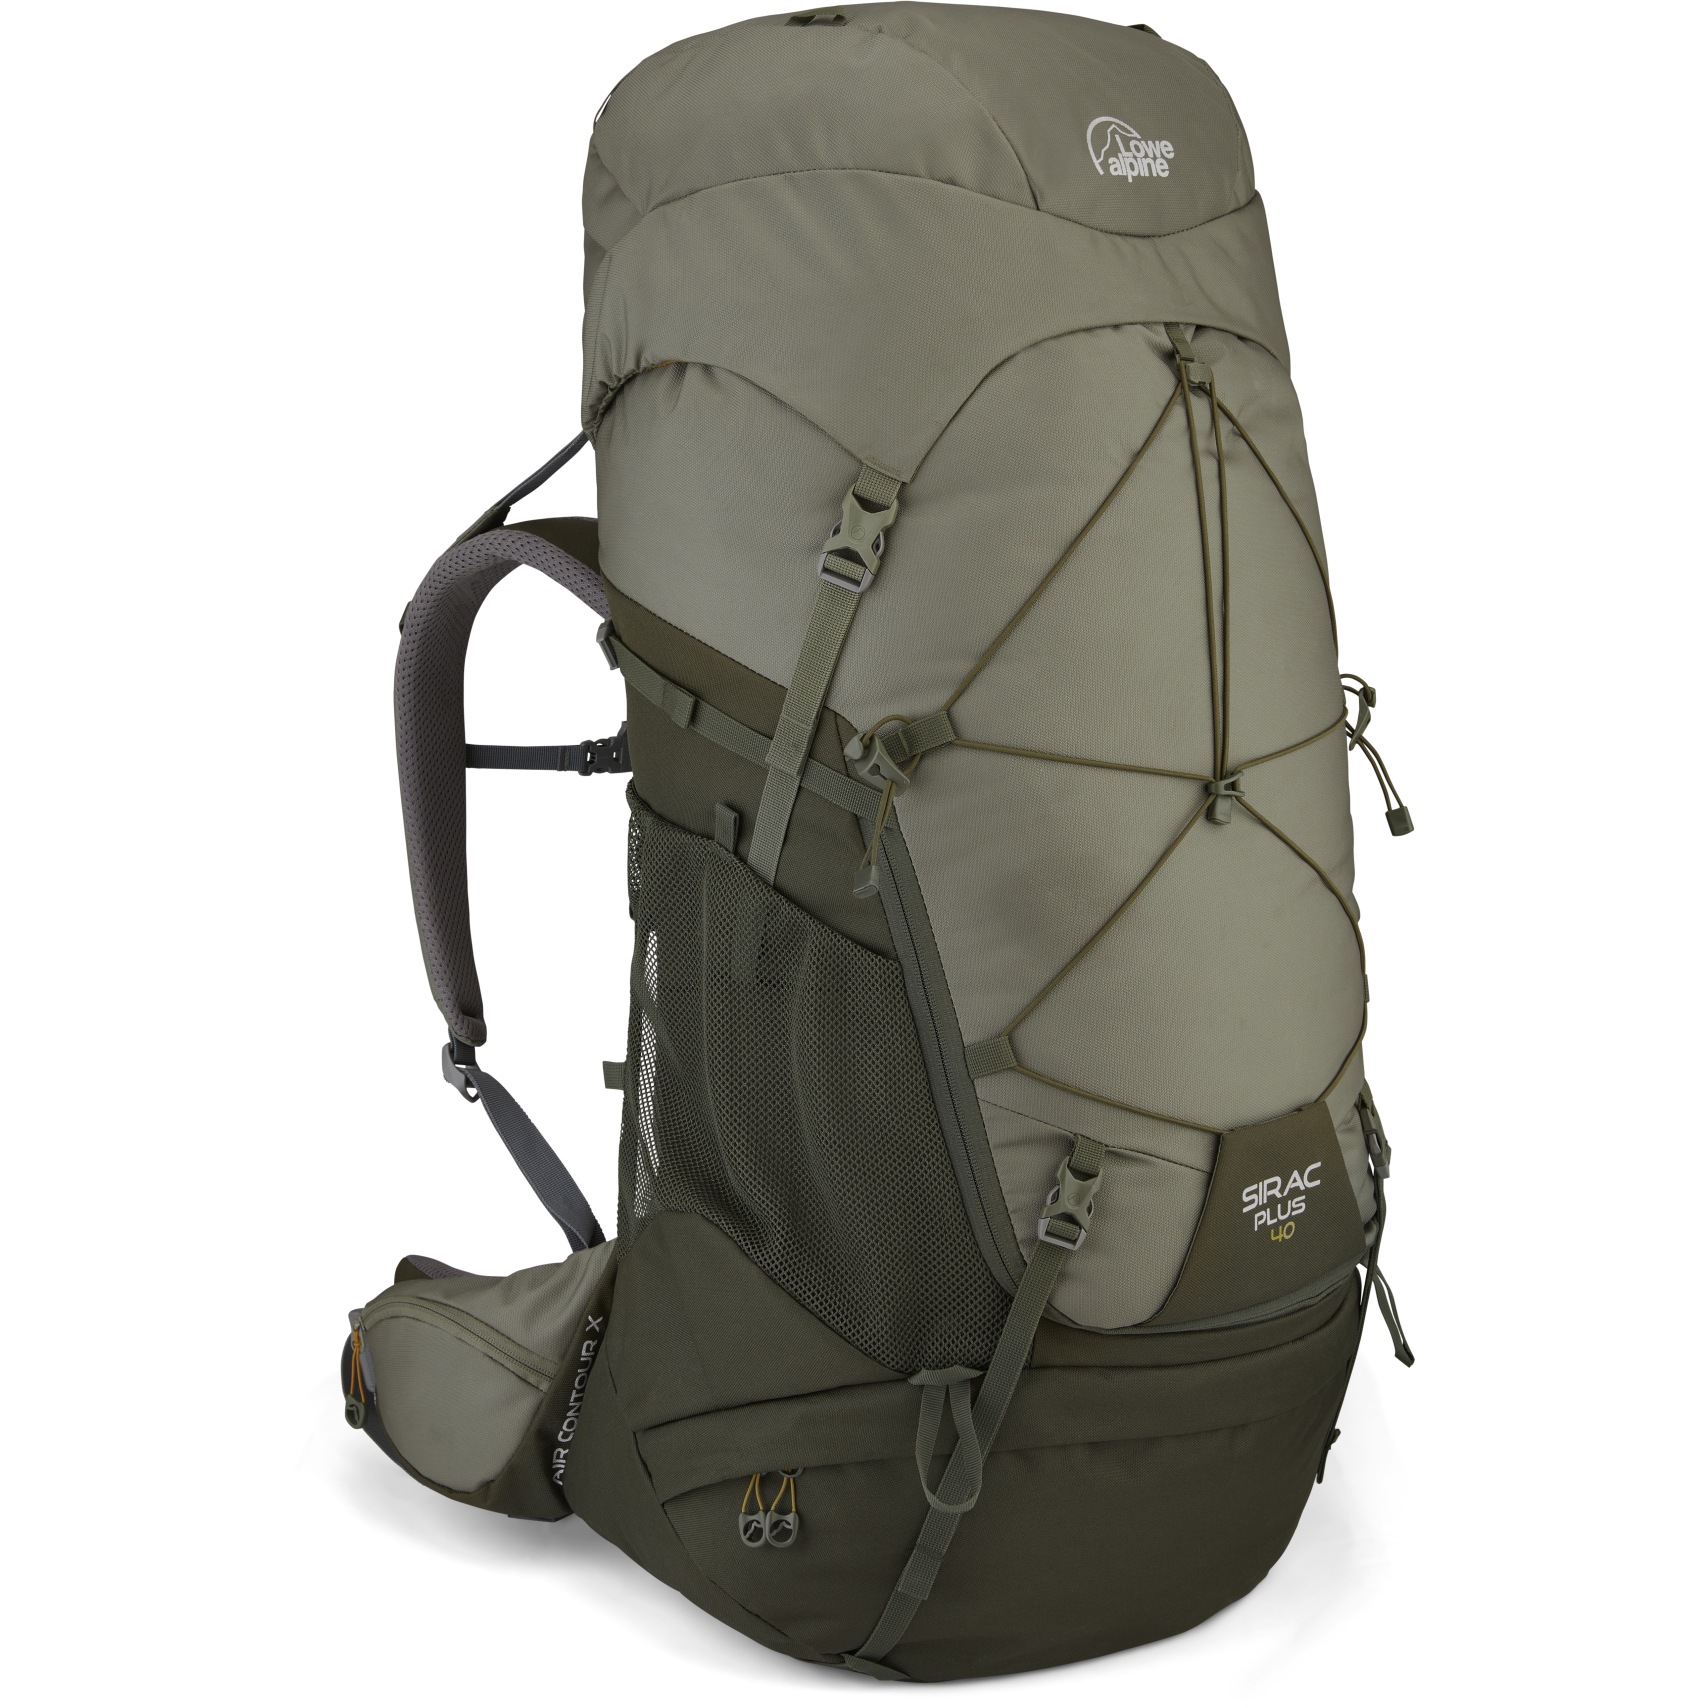 Picture of Lowe Alpine Sirac Plus 40L Backpack - M/L - Light Khaki/Army